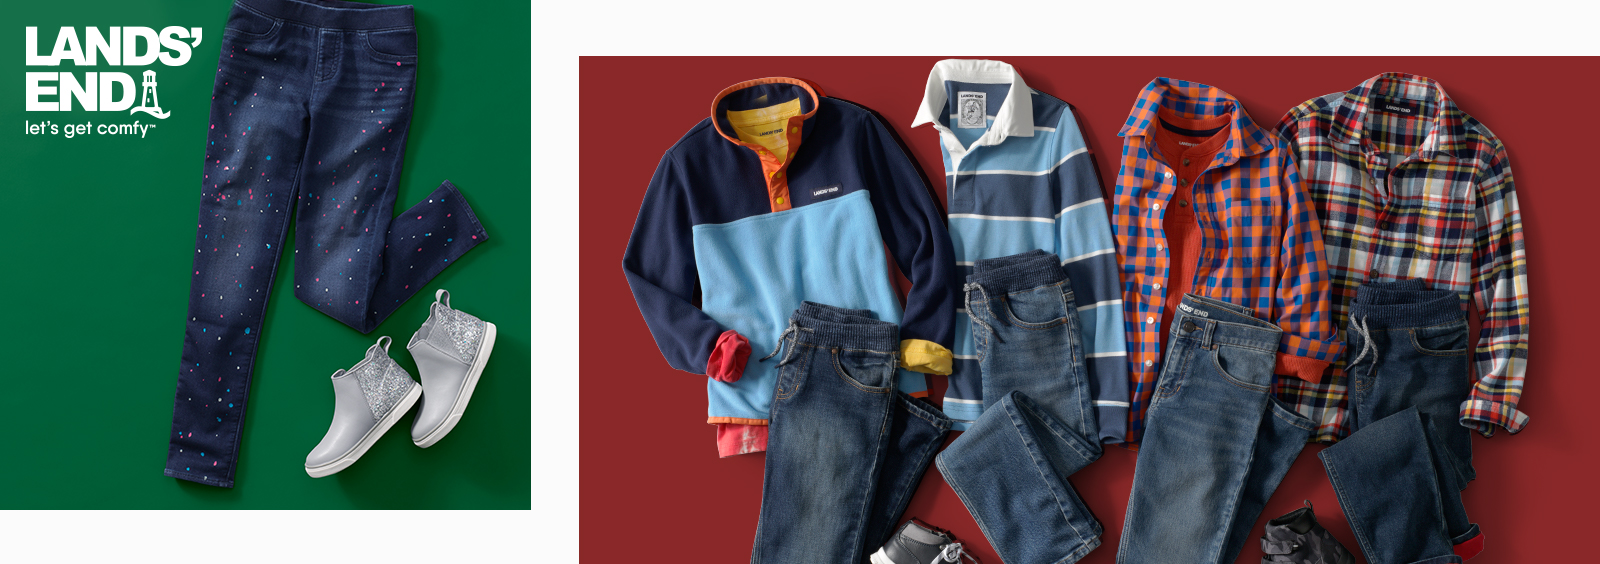 Growing Pains? The Essential Guide to Buying Denim for Your Growing Kids